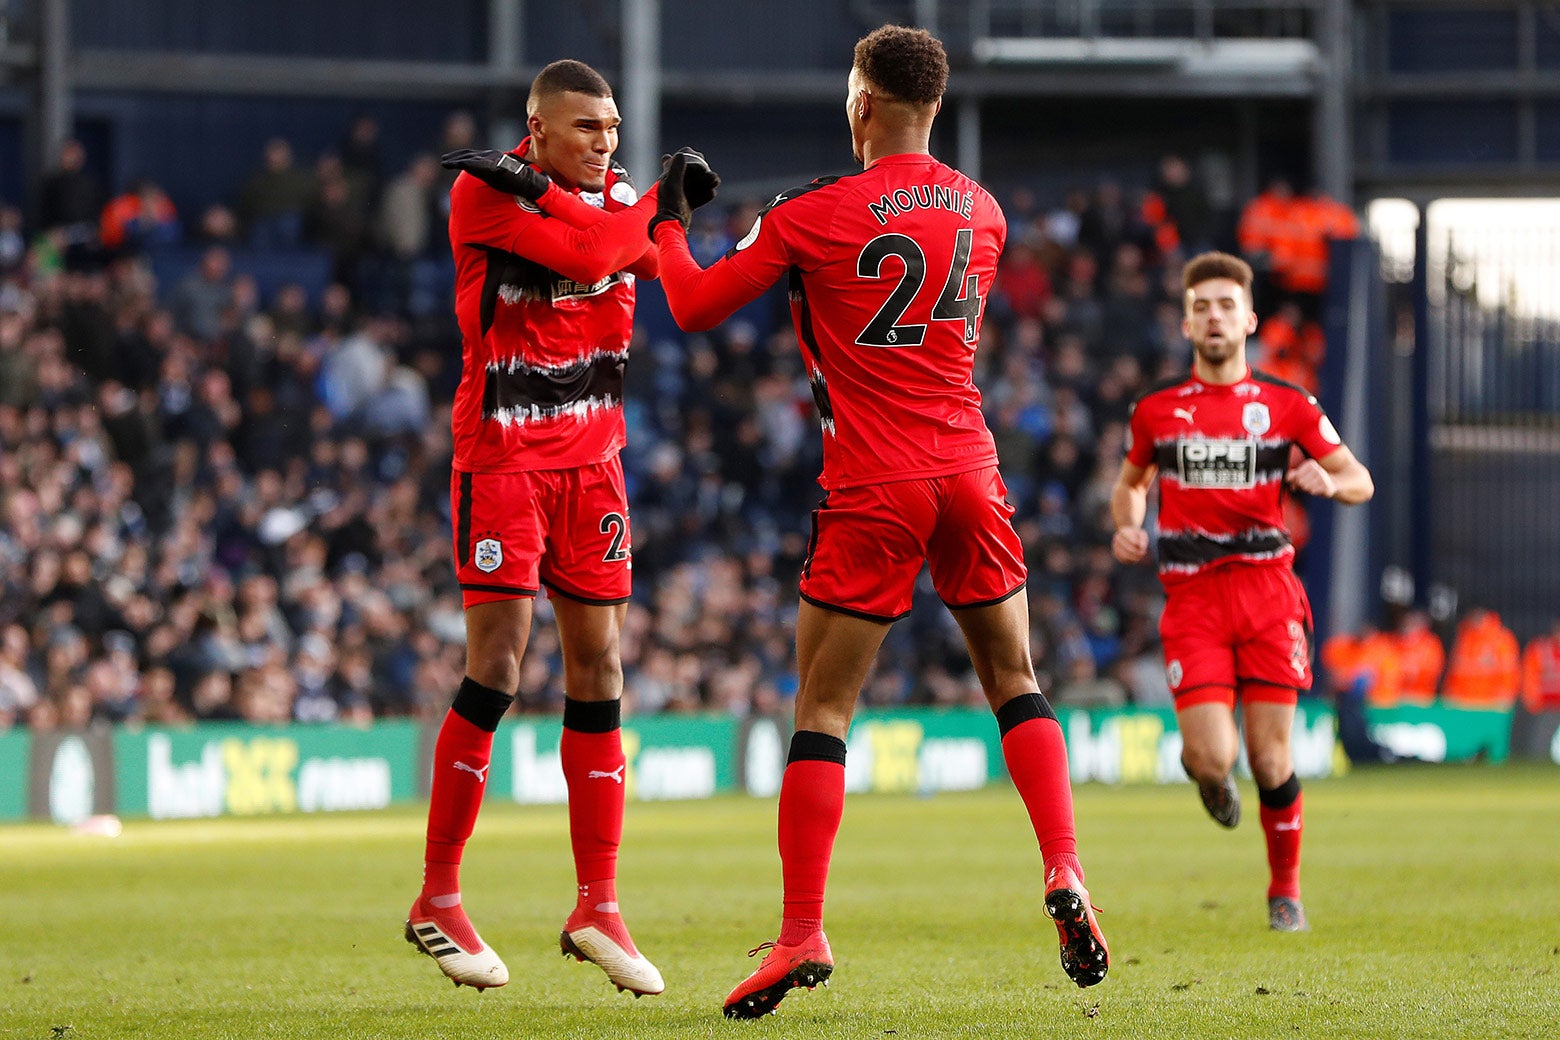 Huddersfield Town soccer players Steve Mounie and Colin Quaner celebrate a goal against West Bromwich Albion with the Wakanda salute, Feb. 24. 